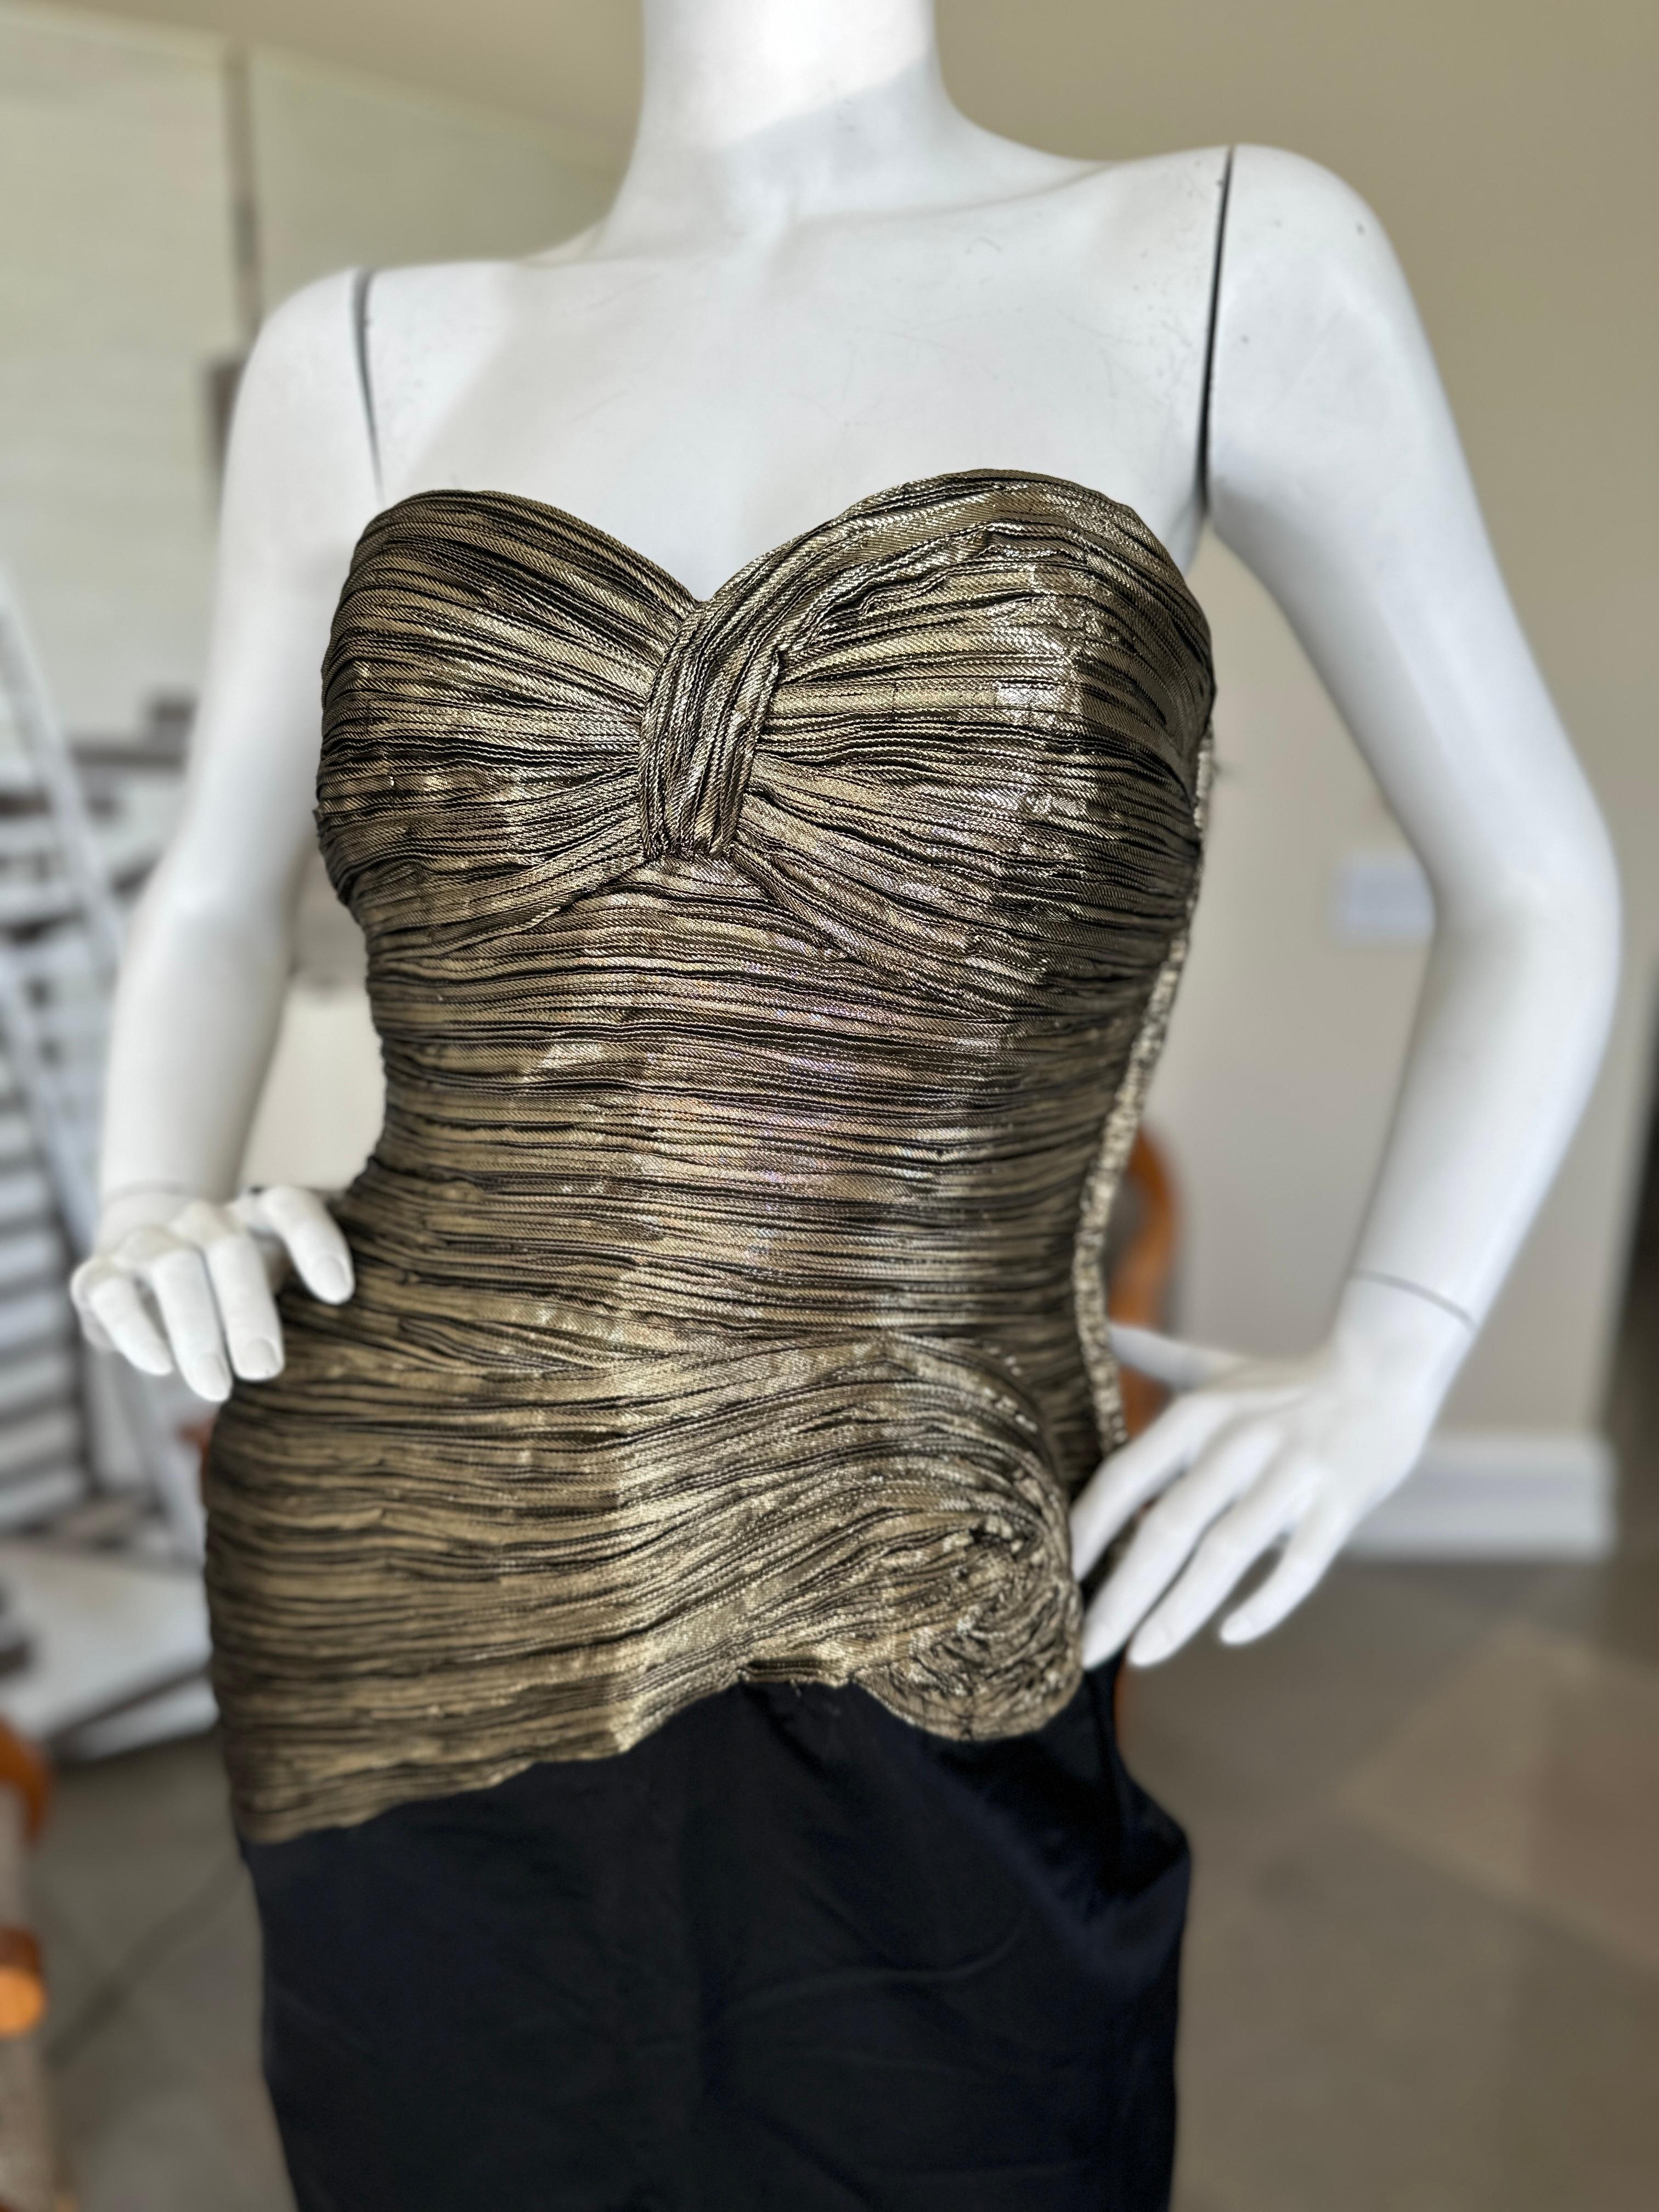 Lillie Rubin Vintage Evening  Dress with Dramatic Gold Corset and High Slit For Sale 2